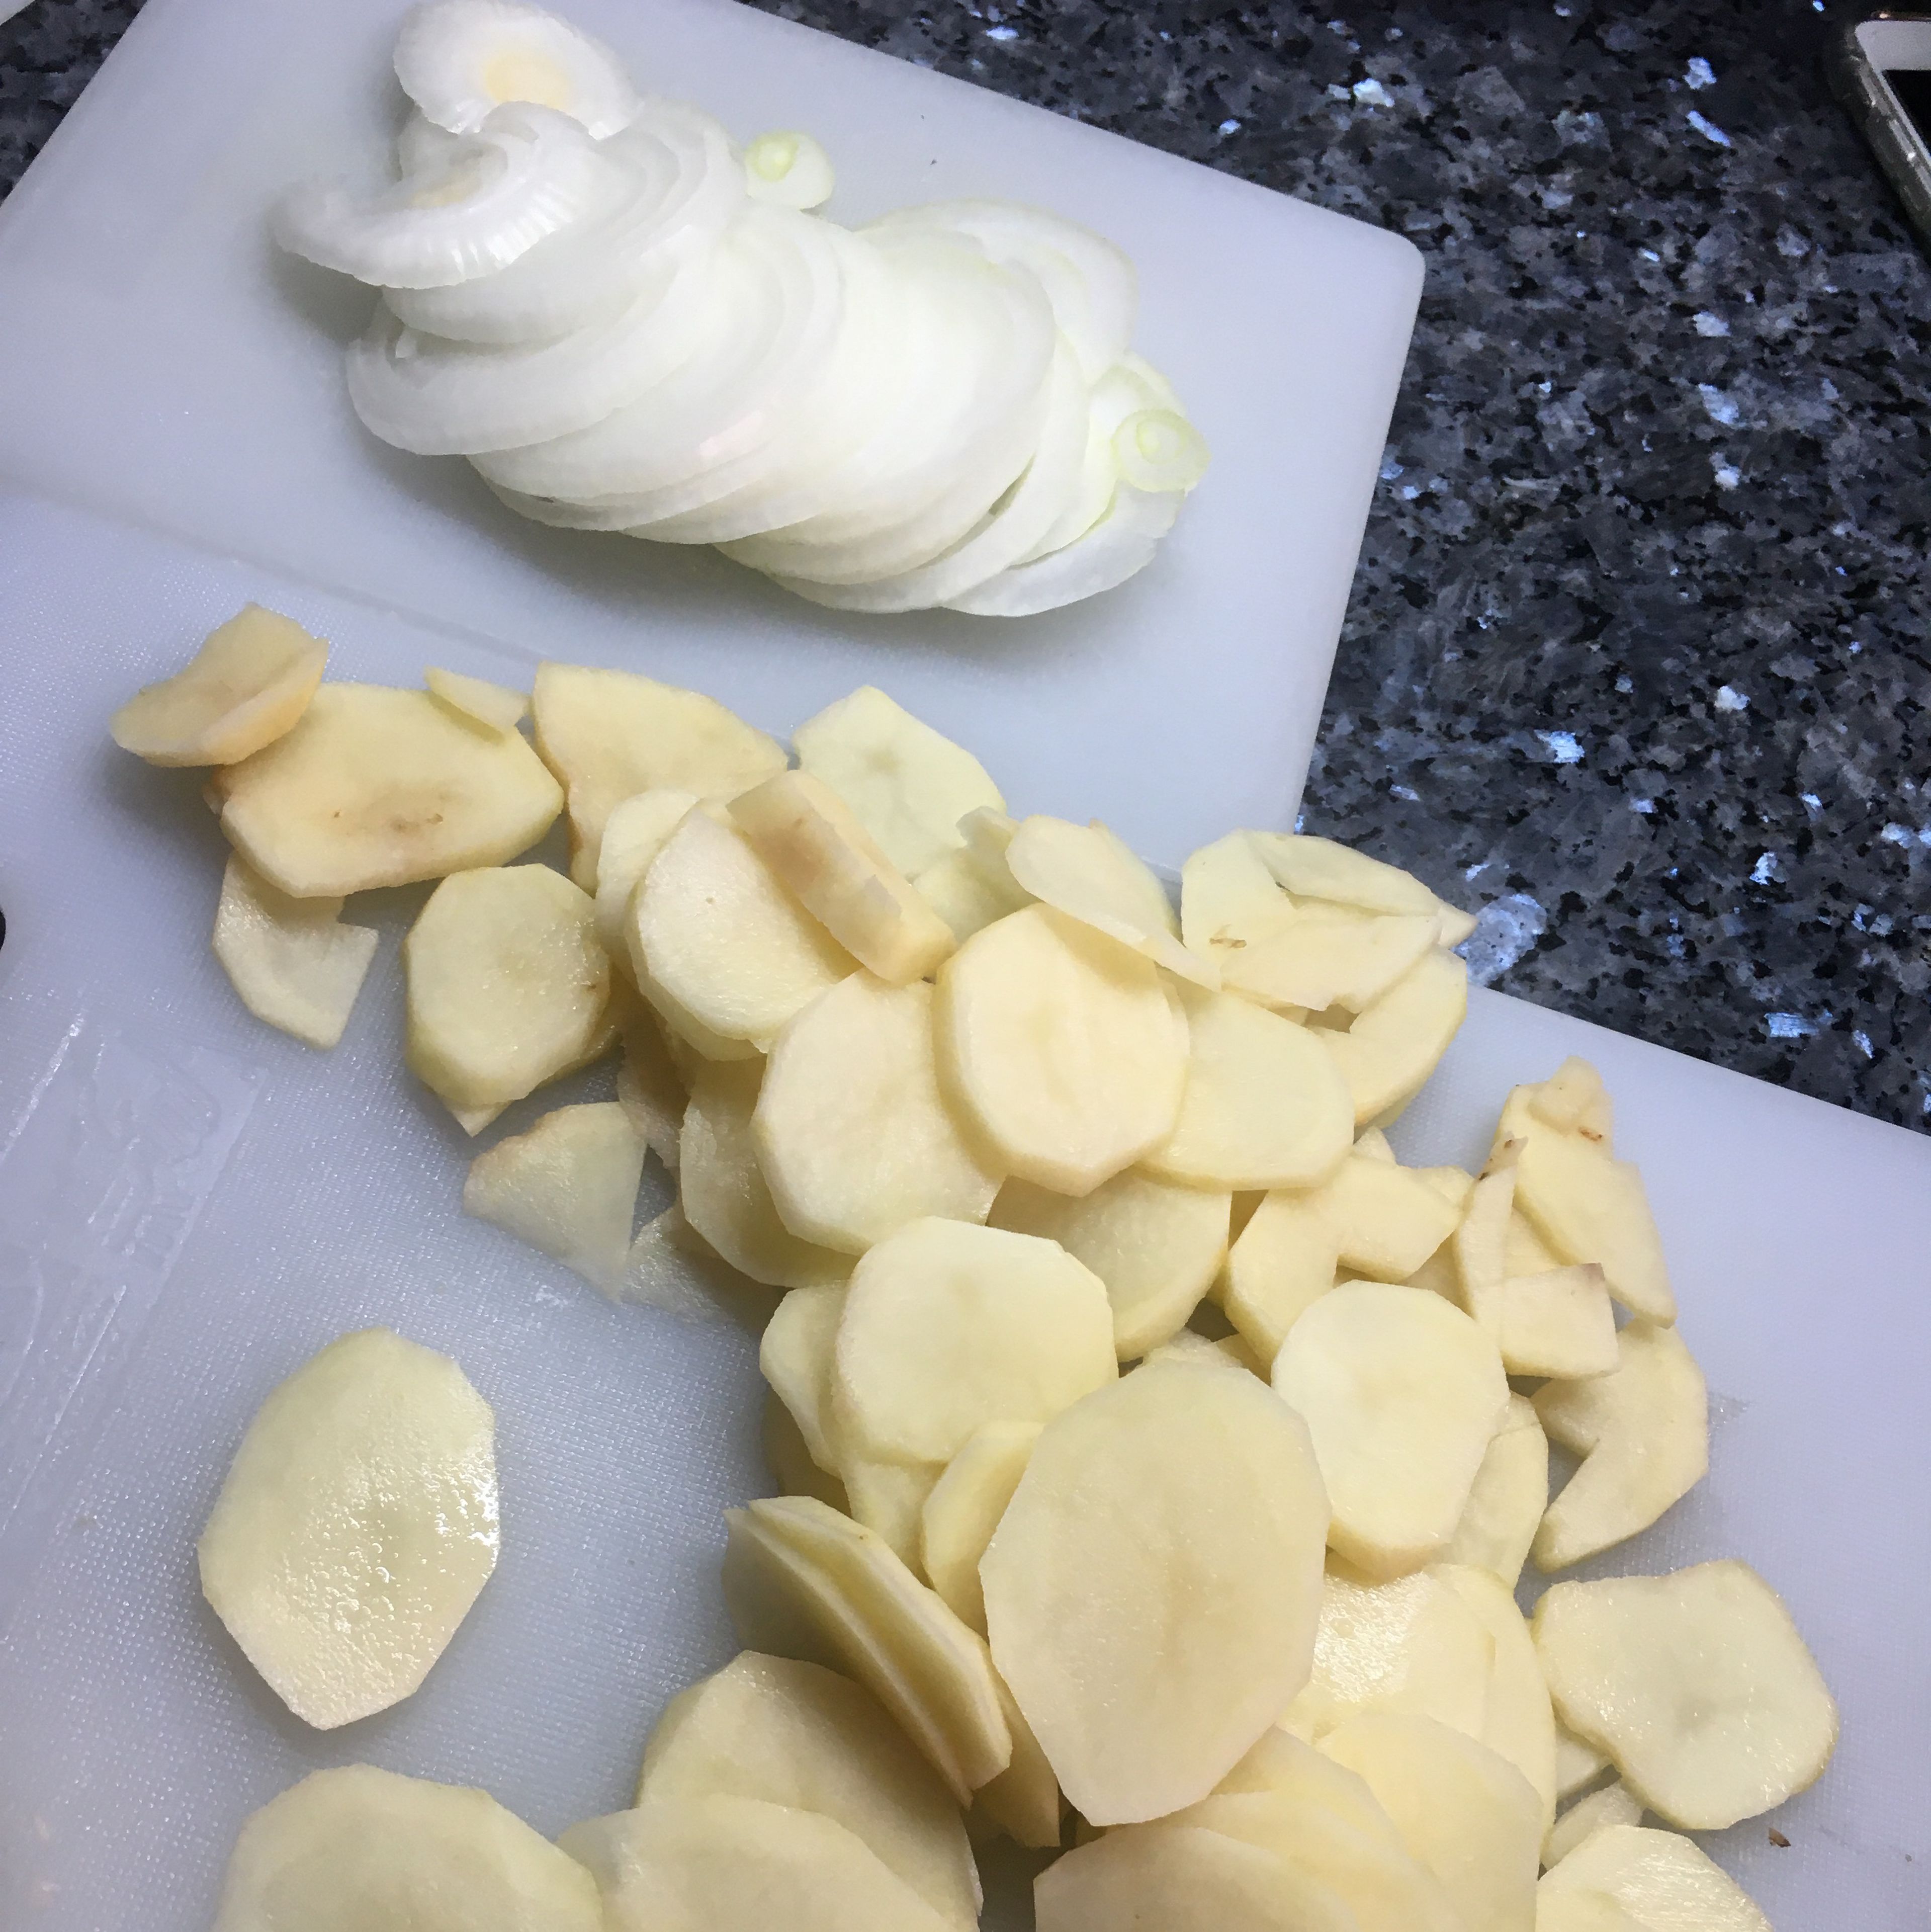 Cut onion and peeled potatoes into slices.